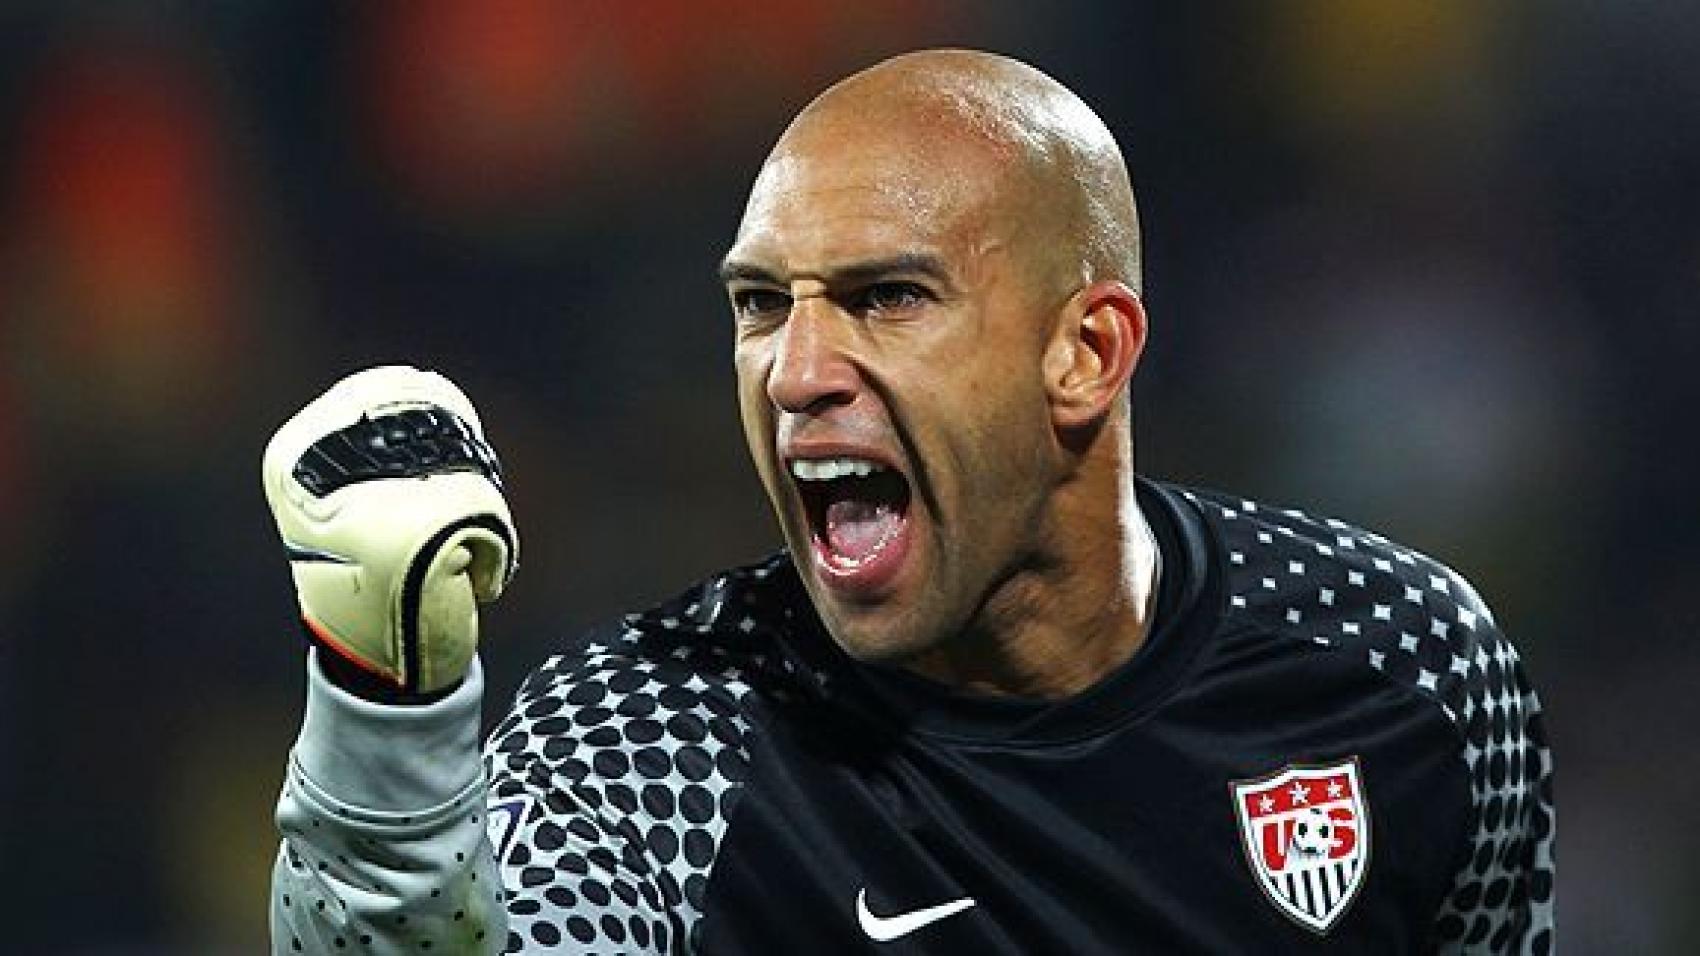 Soccer star Tim Howard is returning to the field to play goalie